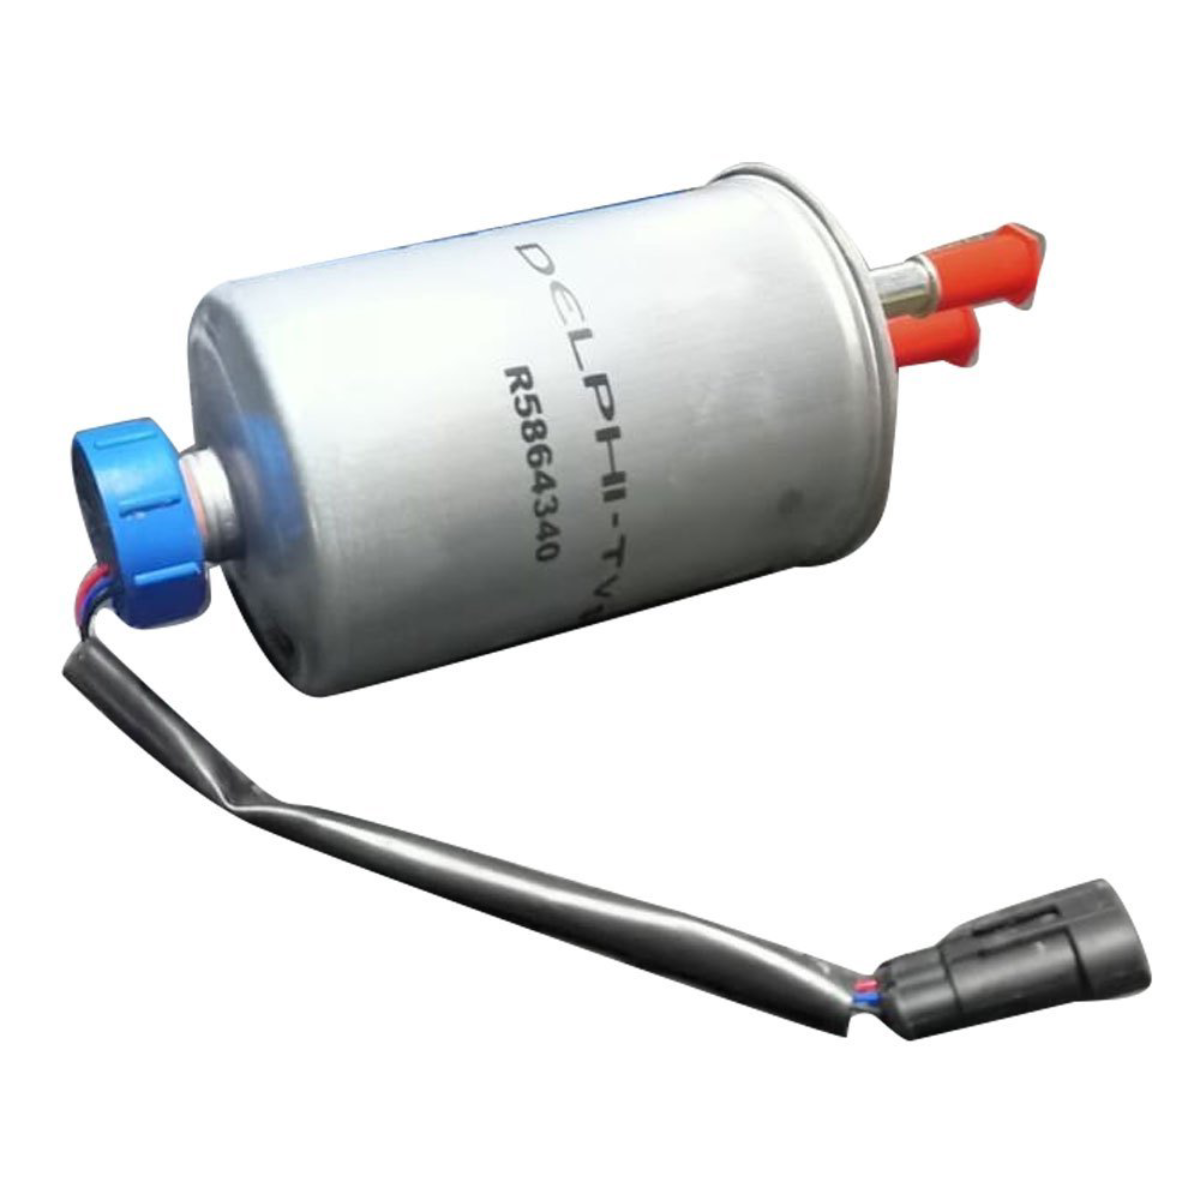 BOSCH LIMITED Fuel(DIESEL) Filter For MAHINDRA TRACTOR (ALL MODEL)  Cartridge Fuel Filter Price in India - Buy BOSCH LIMITED Fuel(DIESEL) Filter  For MAHINDRA TRACTOR (ALL MODEL) Cartridge Fuel Filter online at